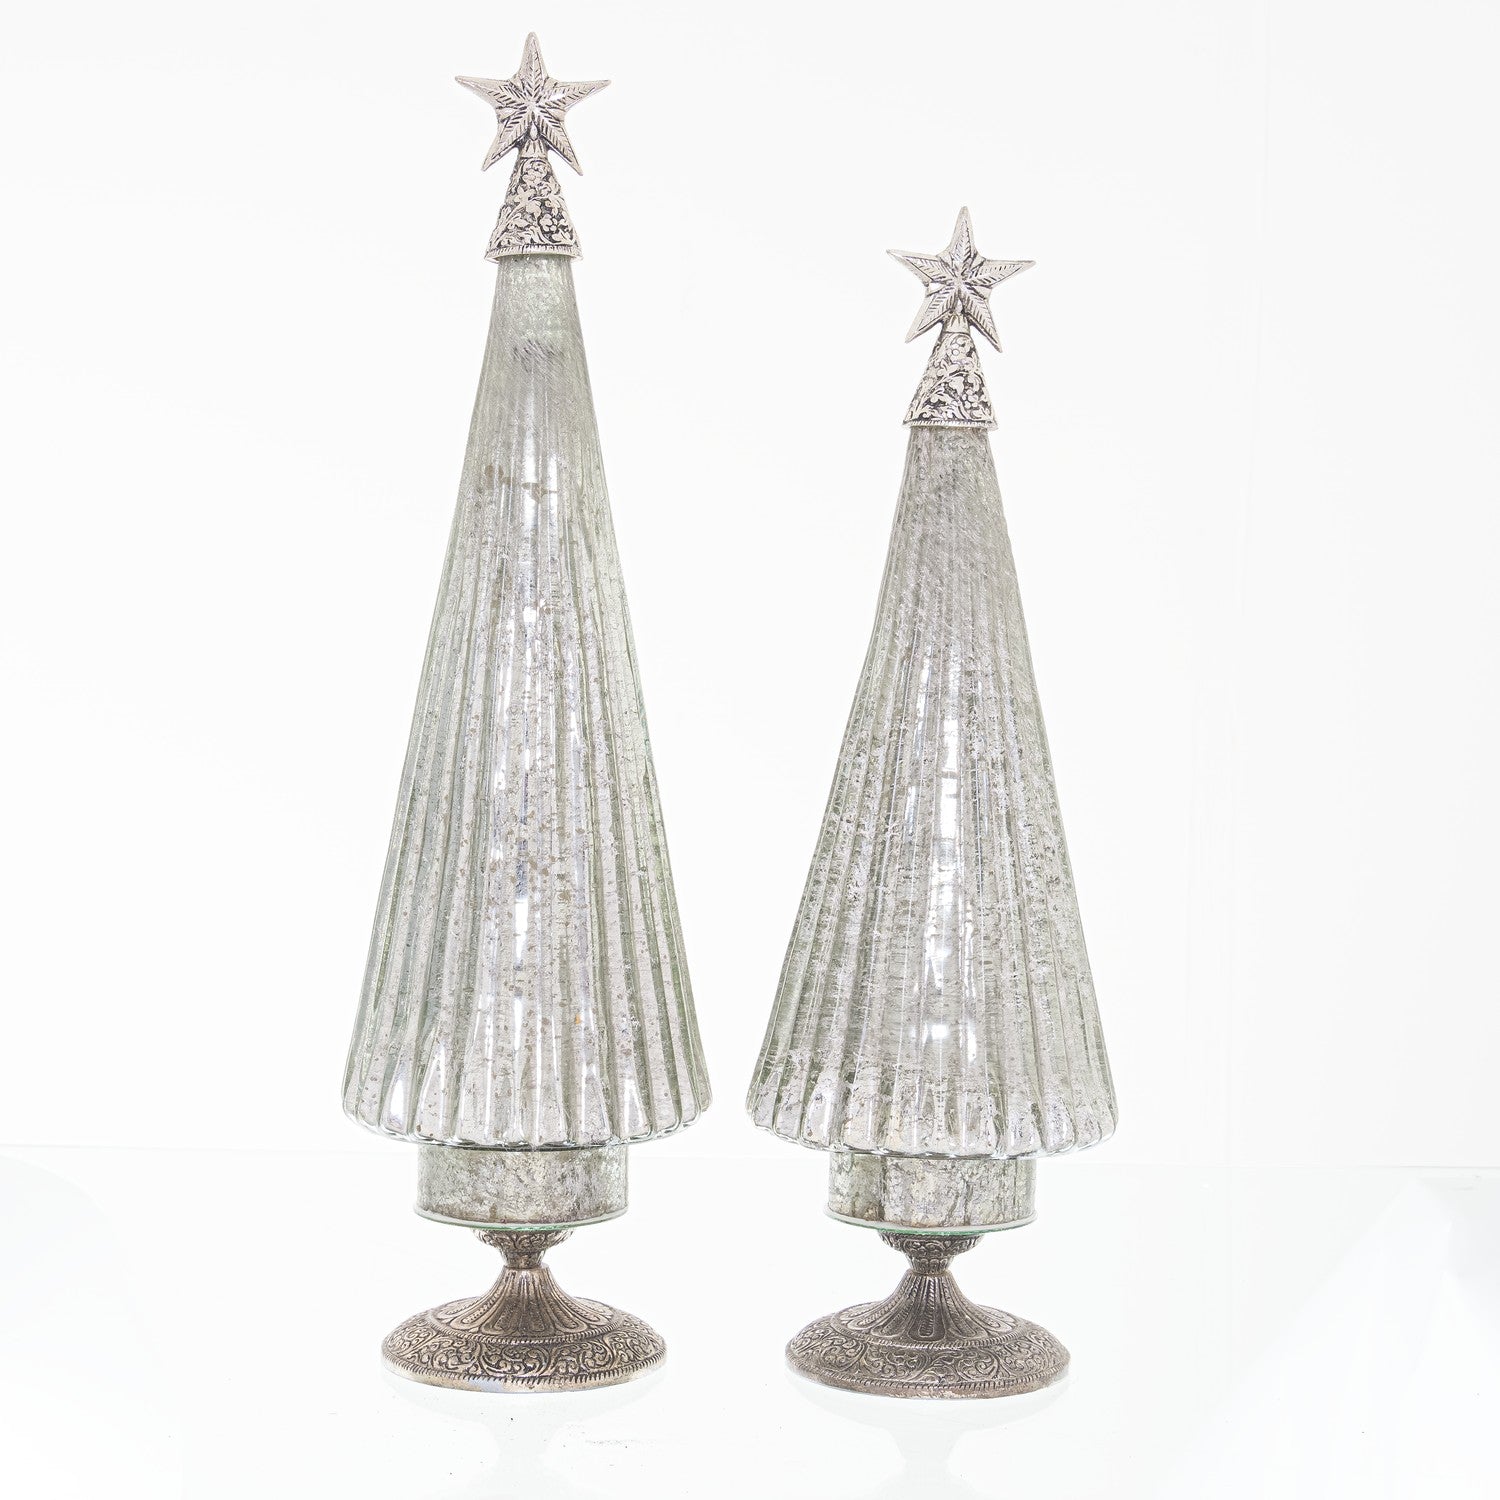 The Noel Collection Footed Glass Decorative Tree